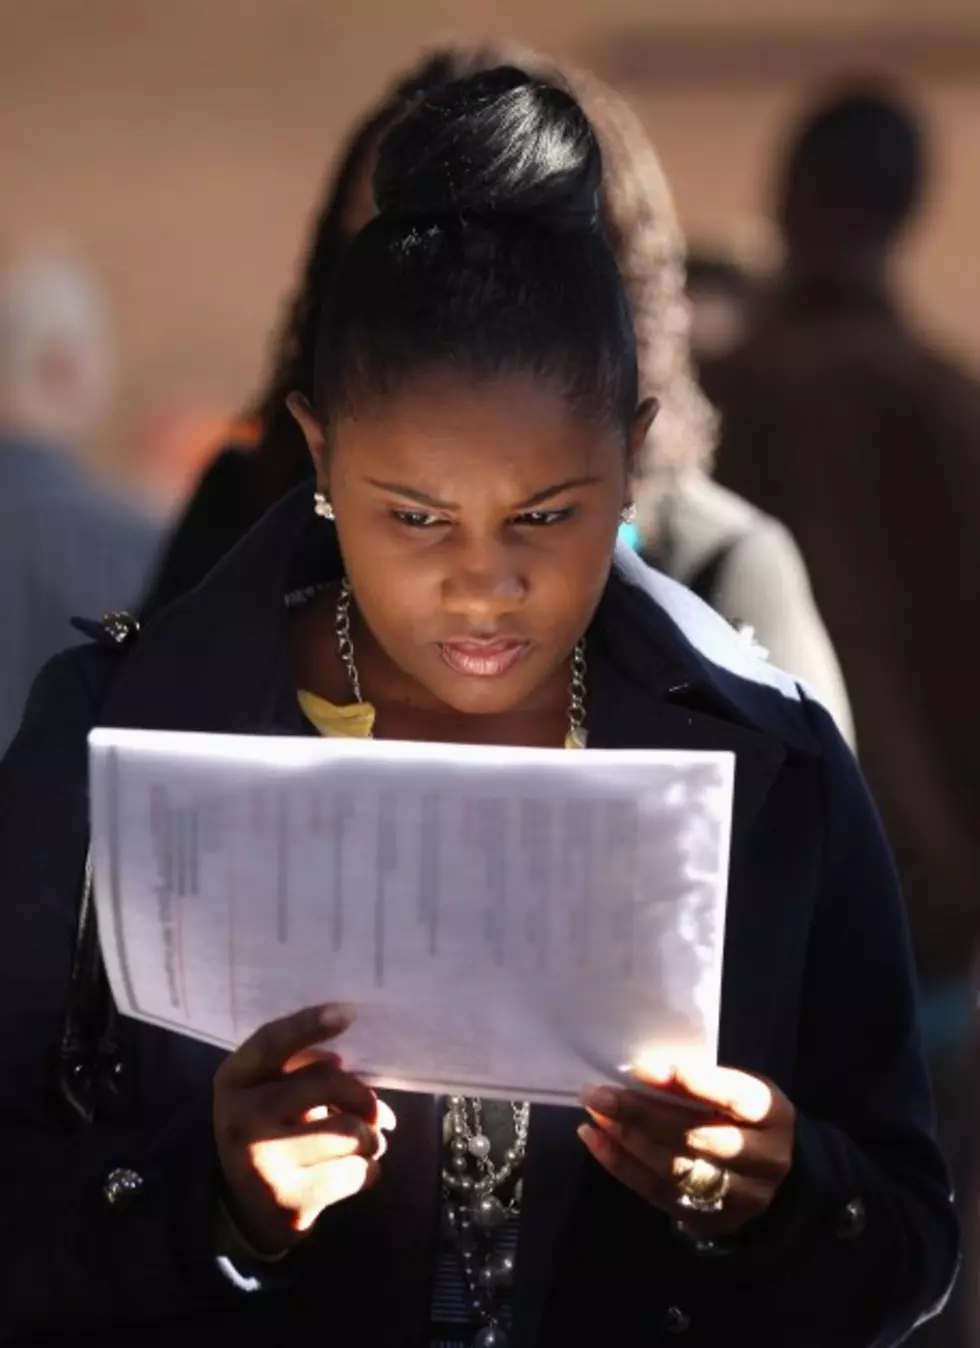 College Educated Black Female Finds It Hard To Get A Job Until She Lies [VIDEO]